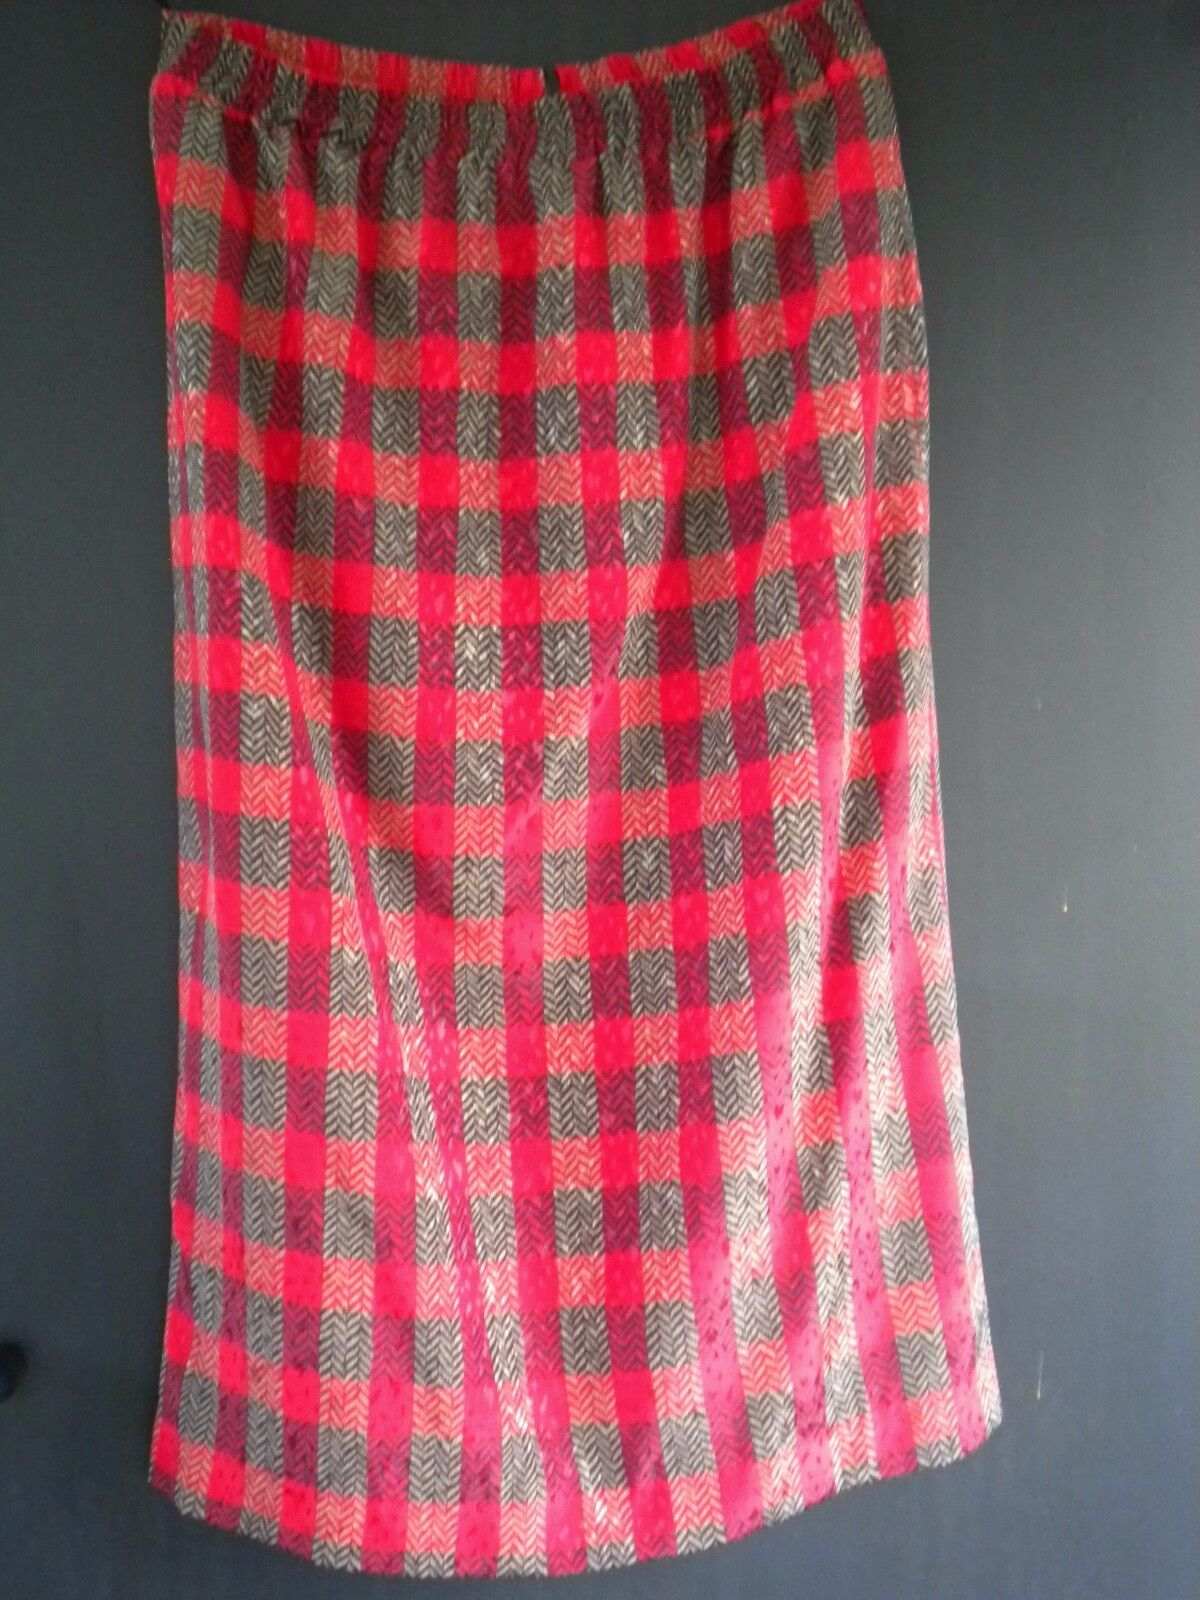 Womens Jacksonville Mall Skirt Red Size 40 Measurement Accurate Super popular specialty store Pattern Plaid